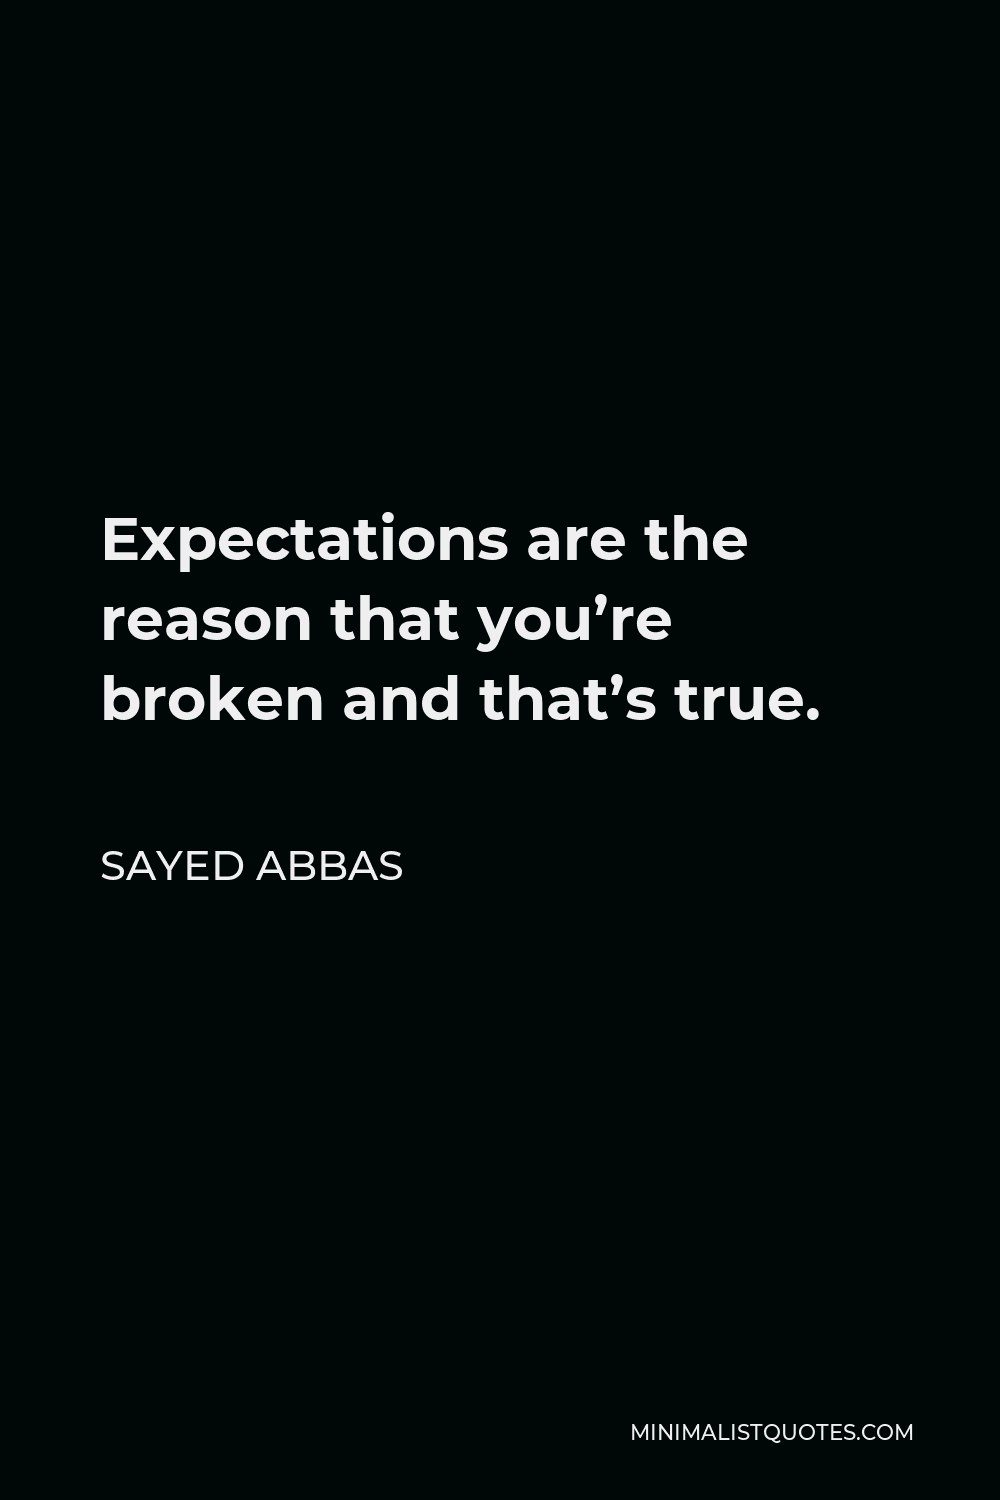 Sayed Abbas Quote - Expectations are the reason that you’re broken and that’s true.